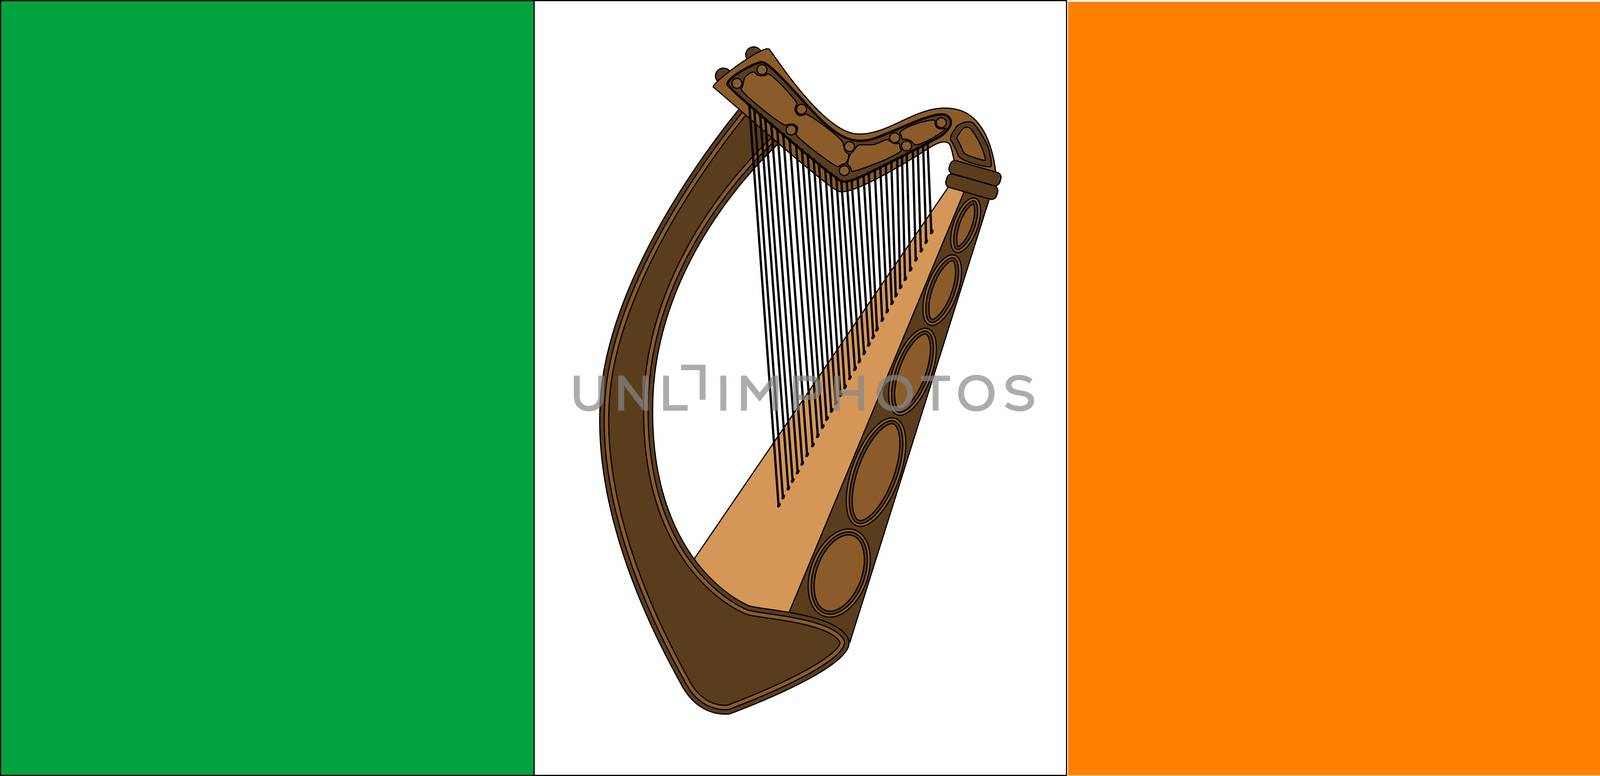 The Flag of Ireland with an added Irish harp in the centre